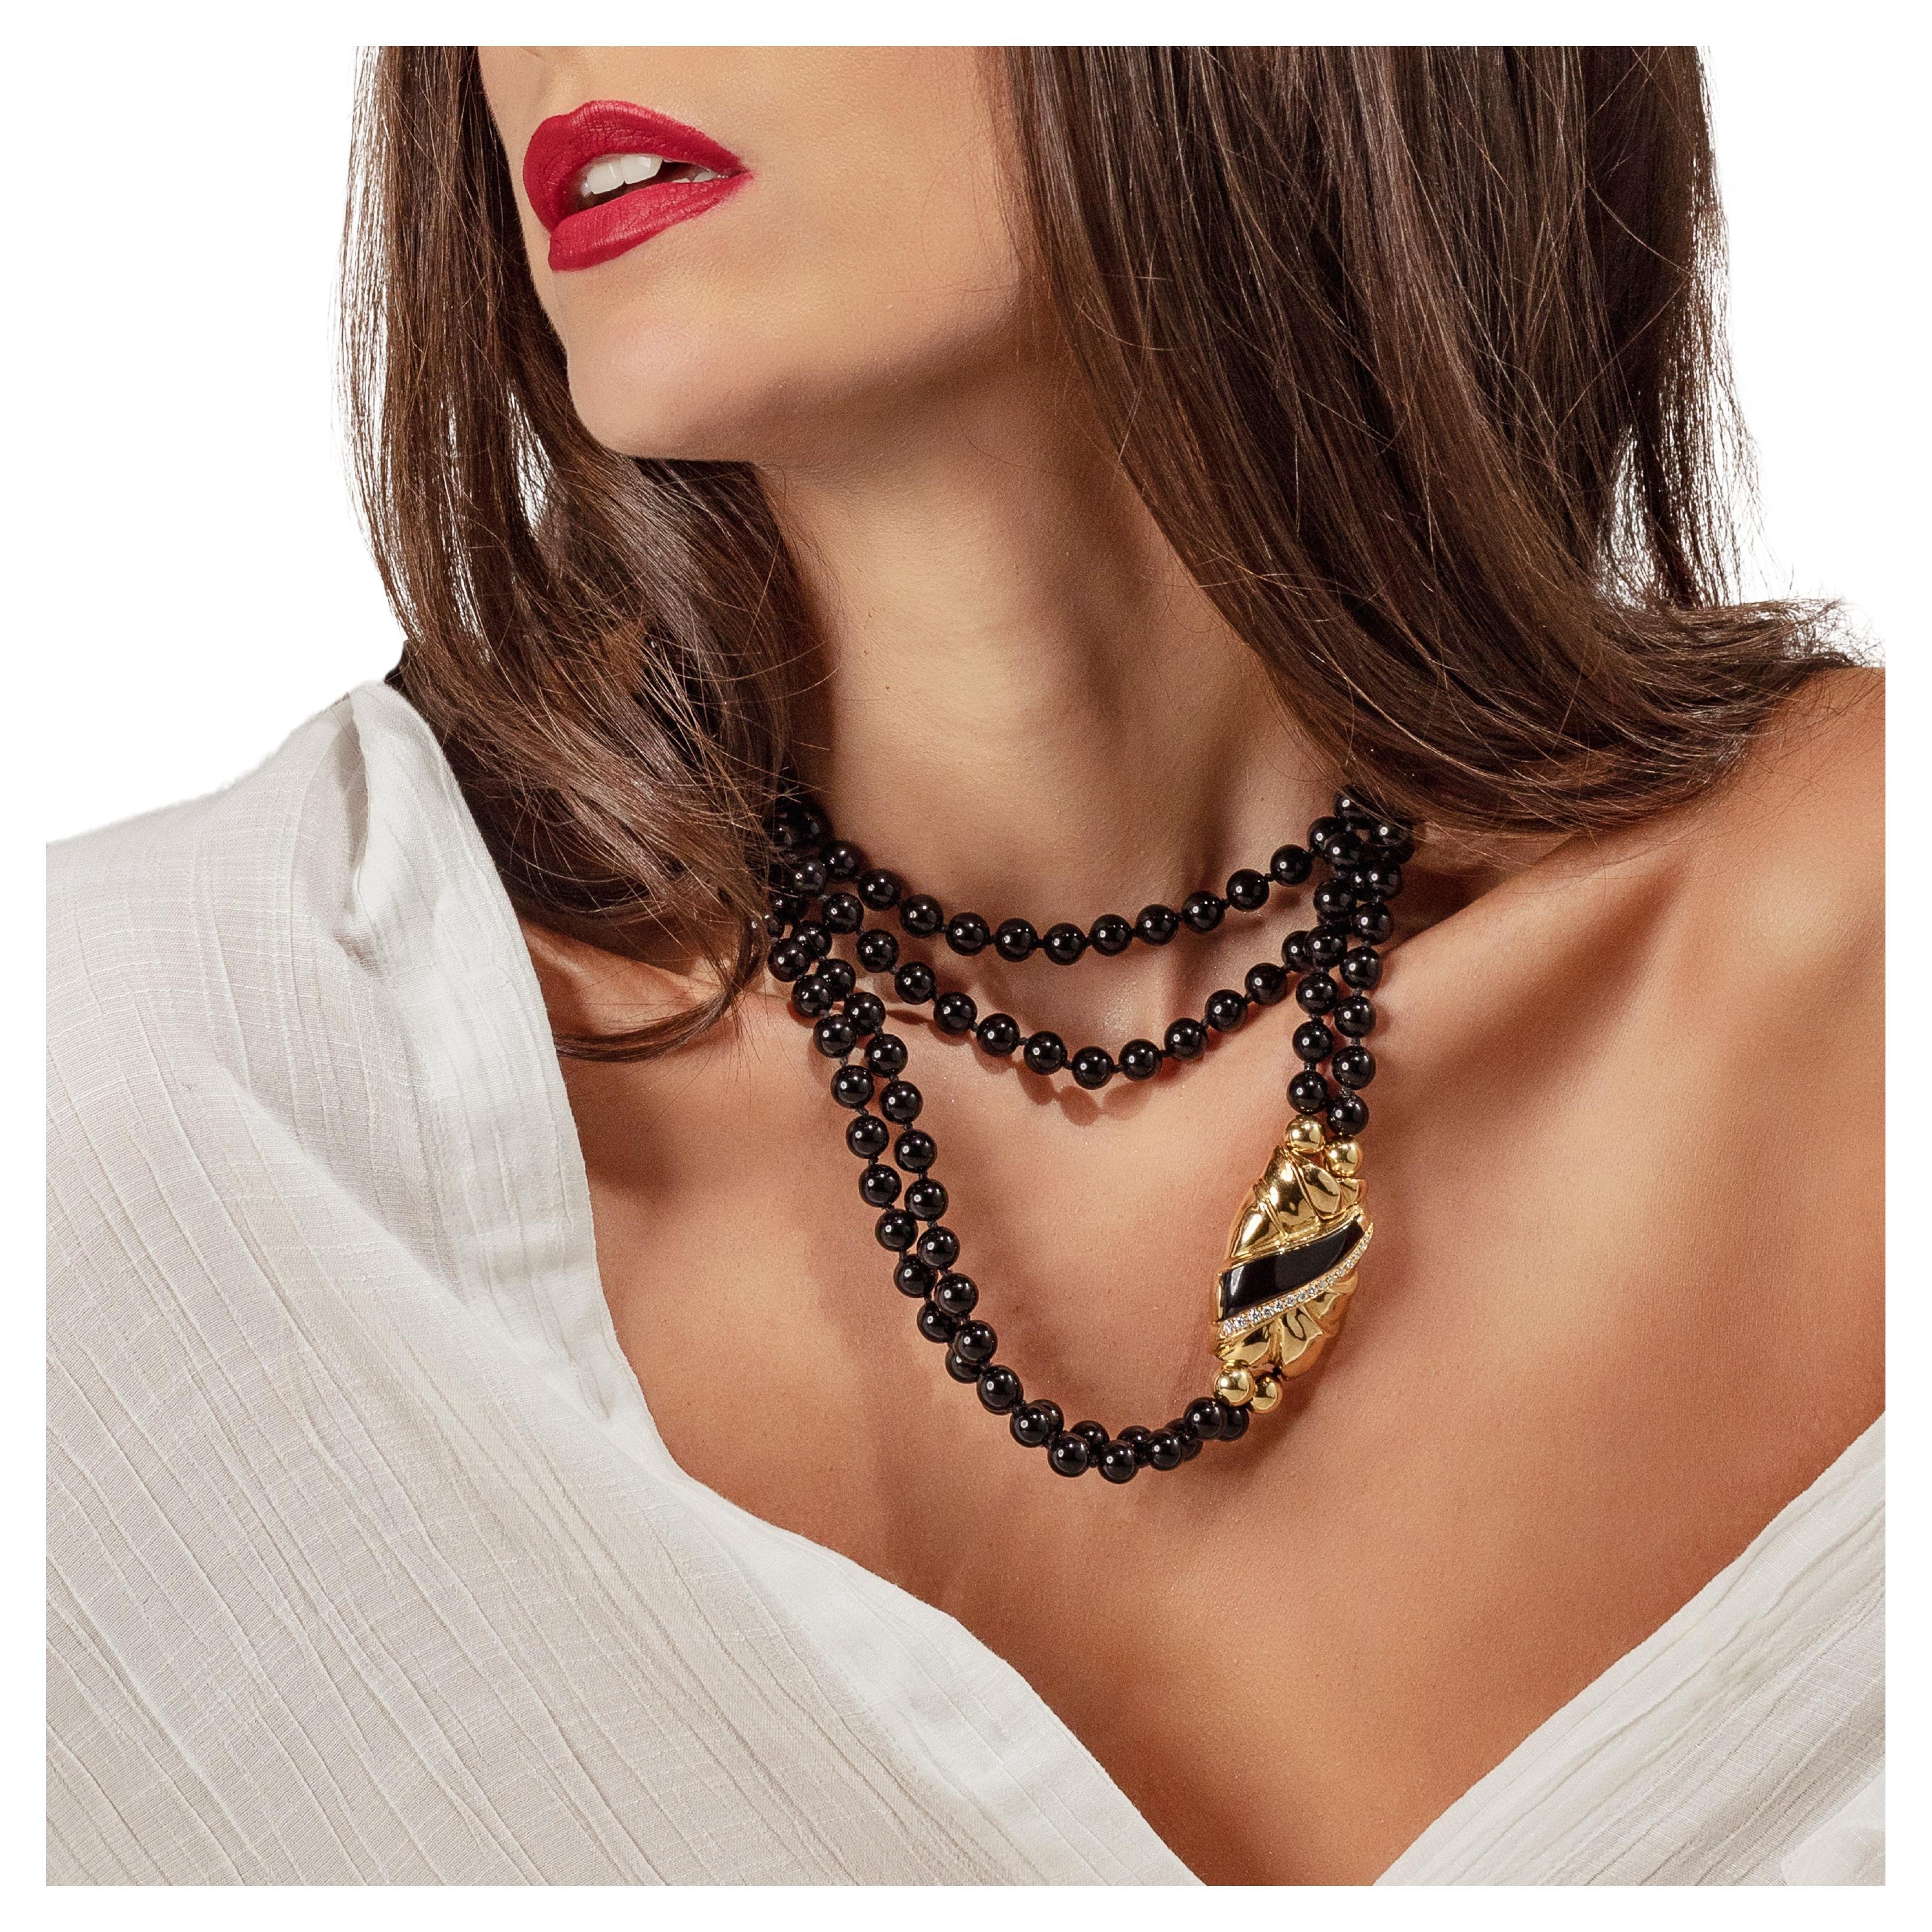 Double-Strand Black Onyx Beaded Necklace With 18ct Gold Clasp For Sale